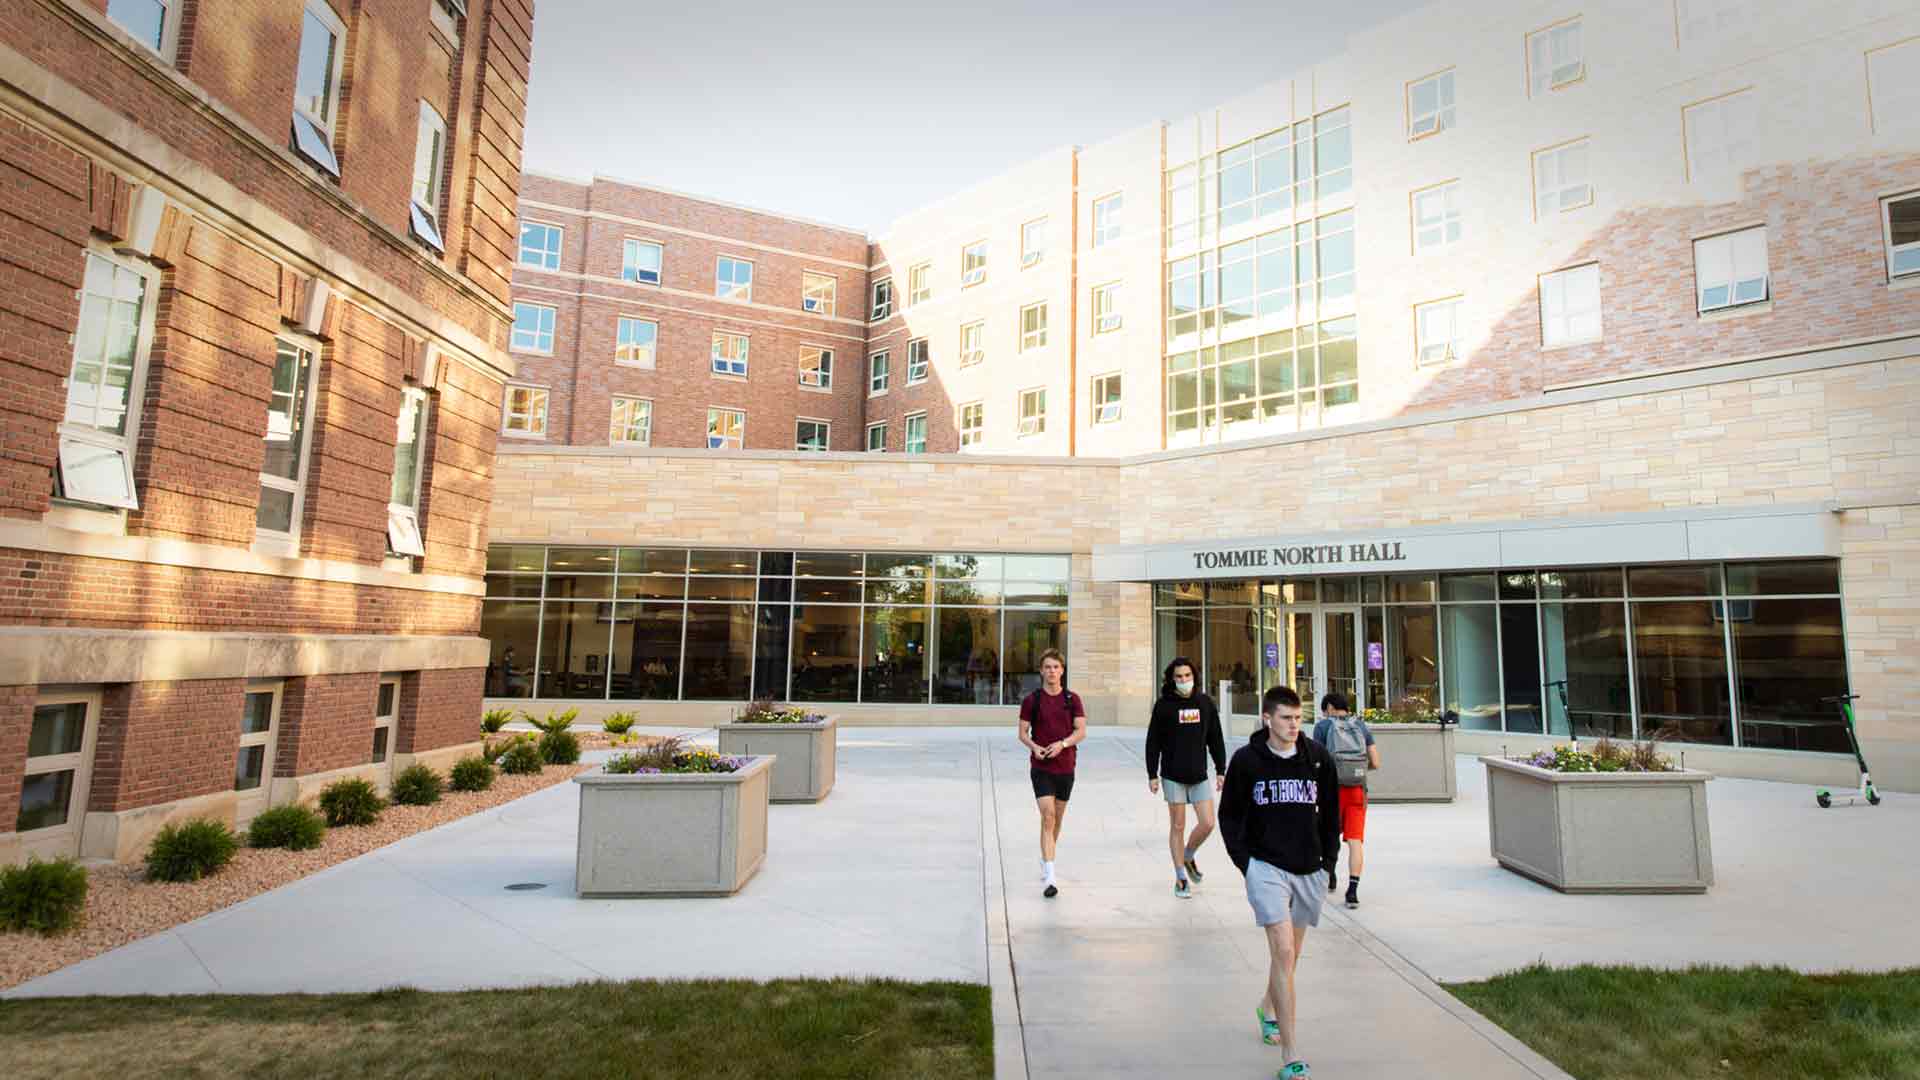 Students walk towards Tommie North Hall